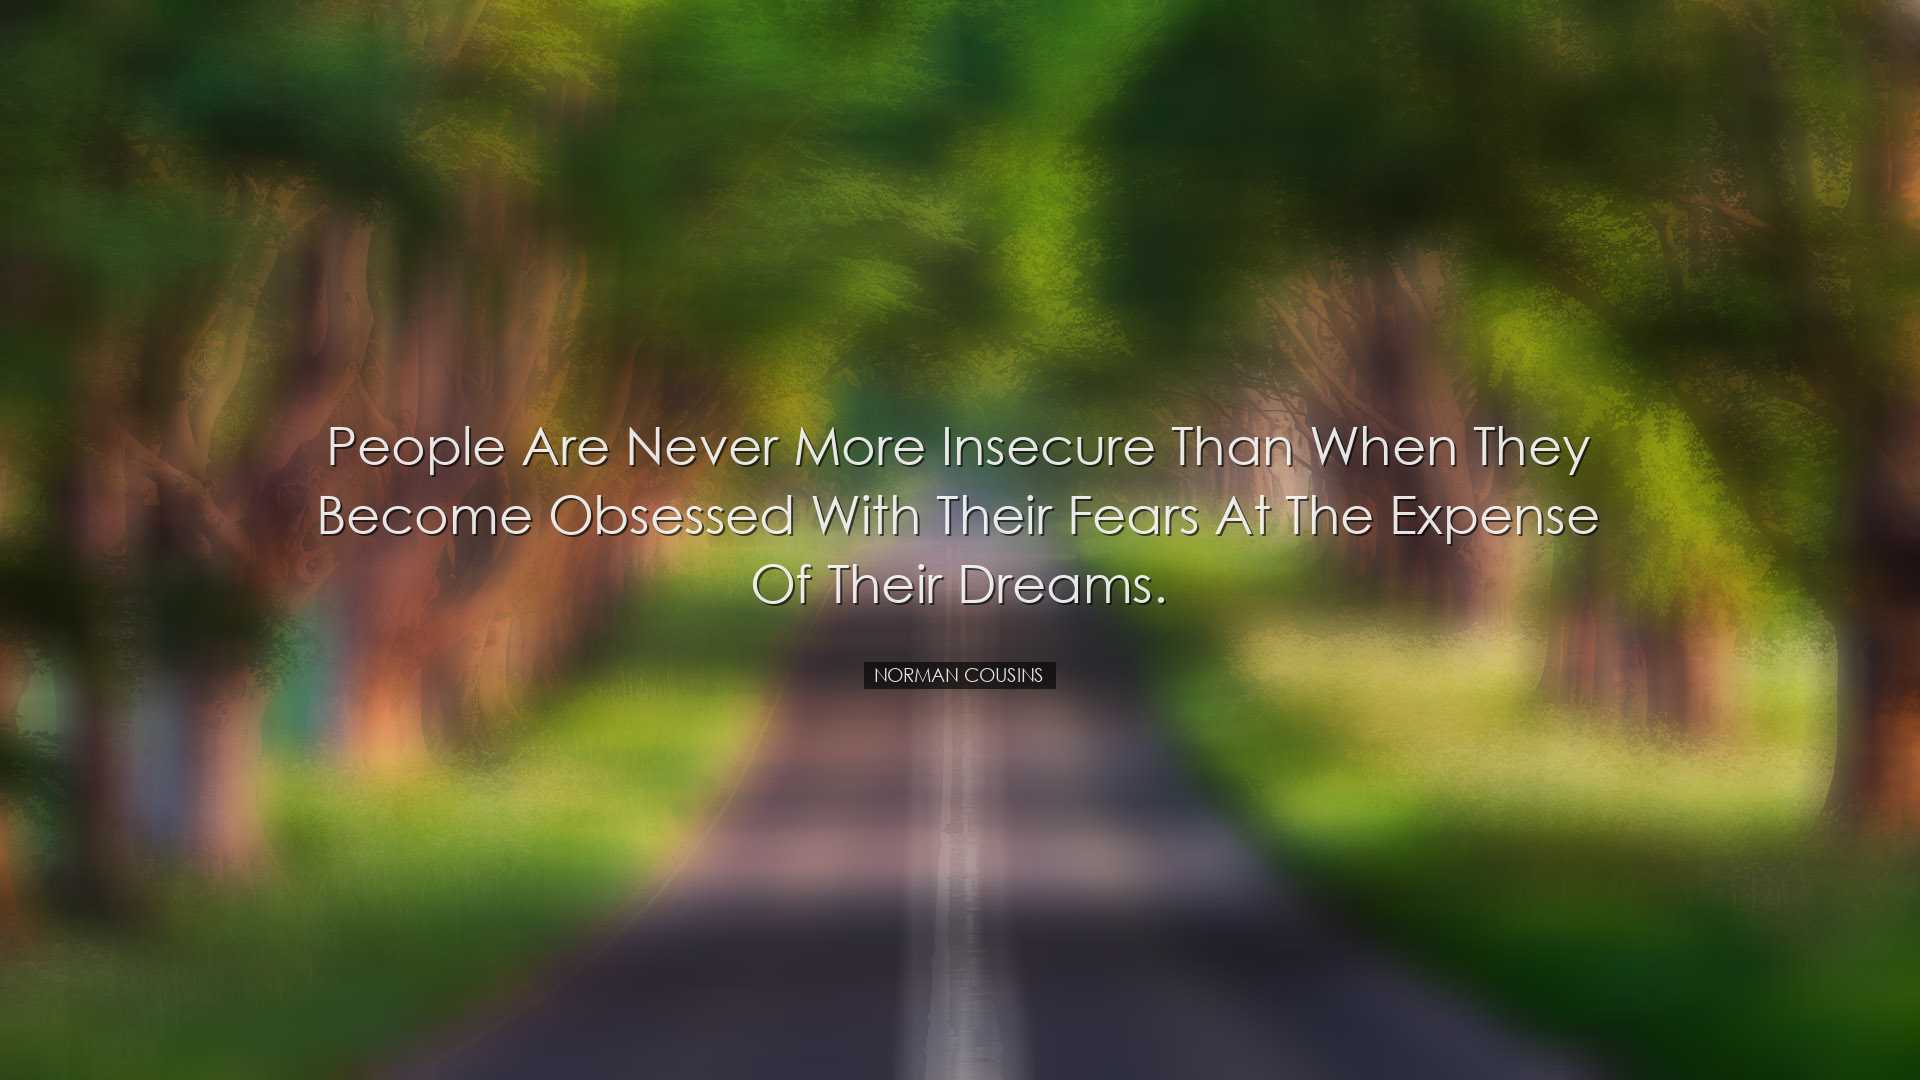 People are never more insecure than when they become obsessed with